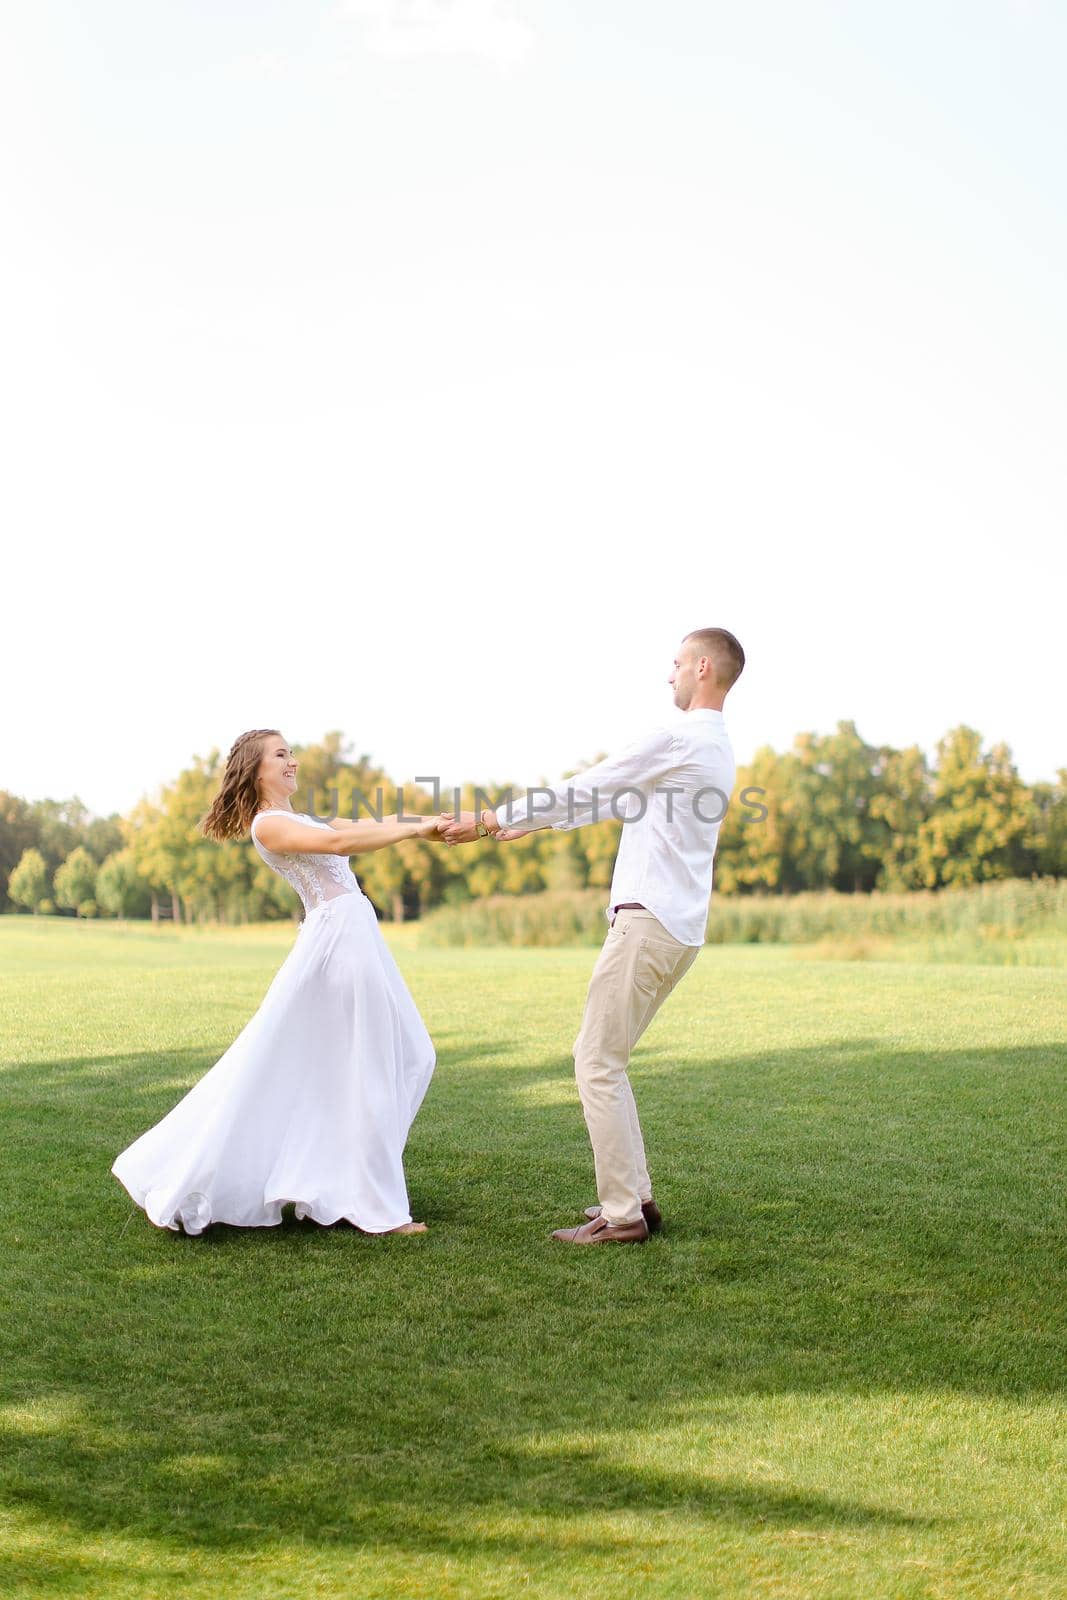 Happy european groom and bride dancing on grass. Concept of wedding photo session on open air and nature.